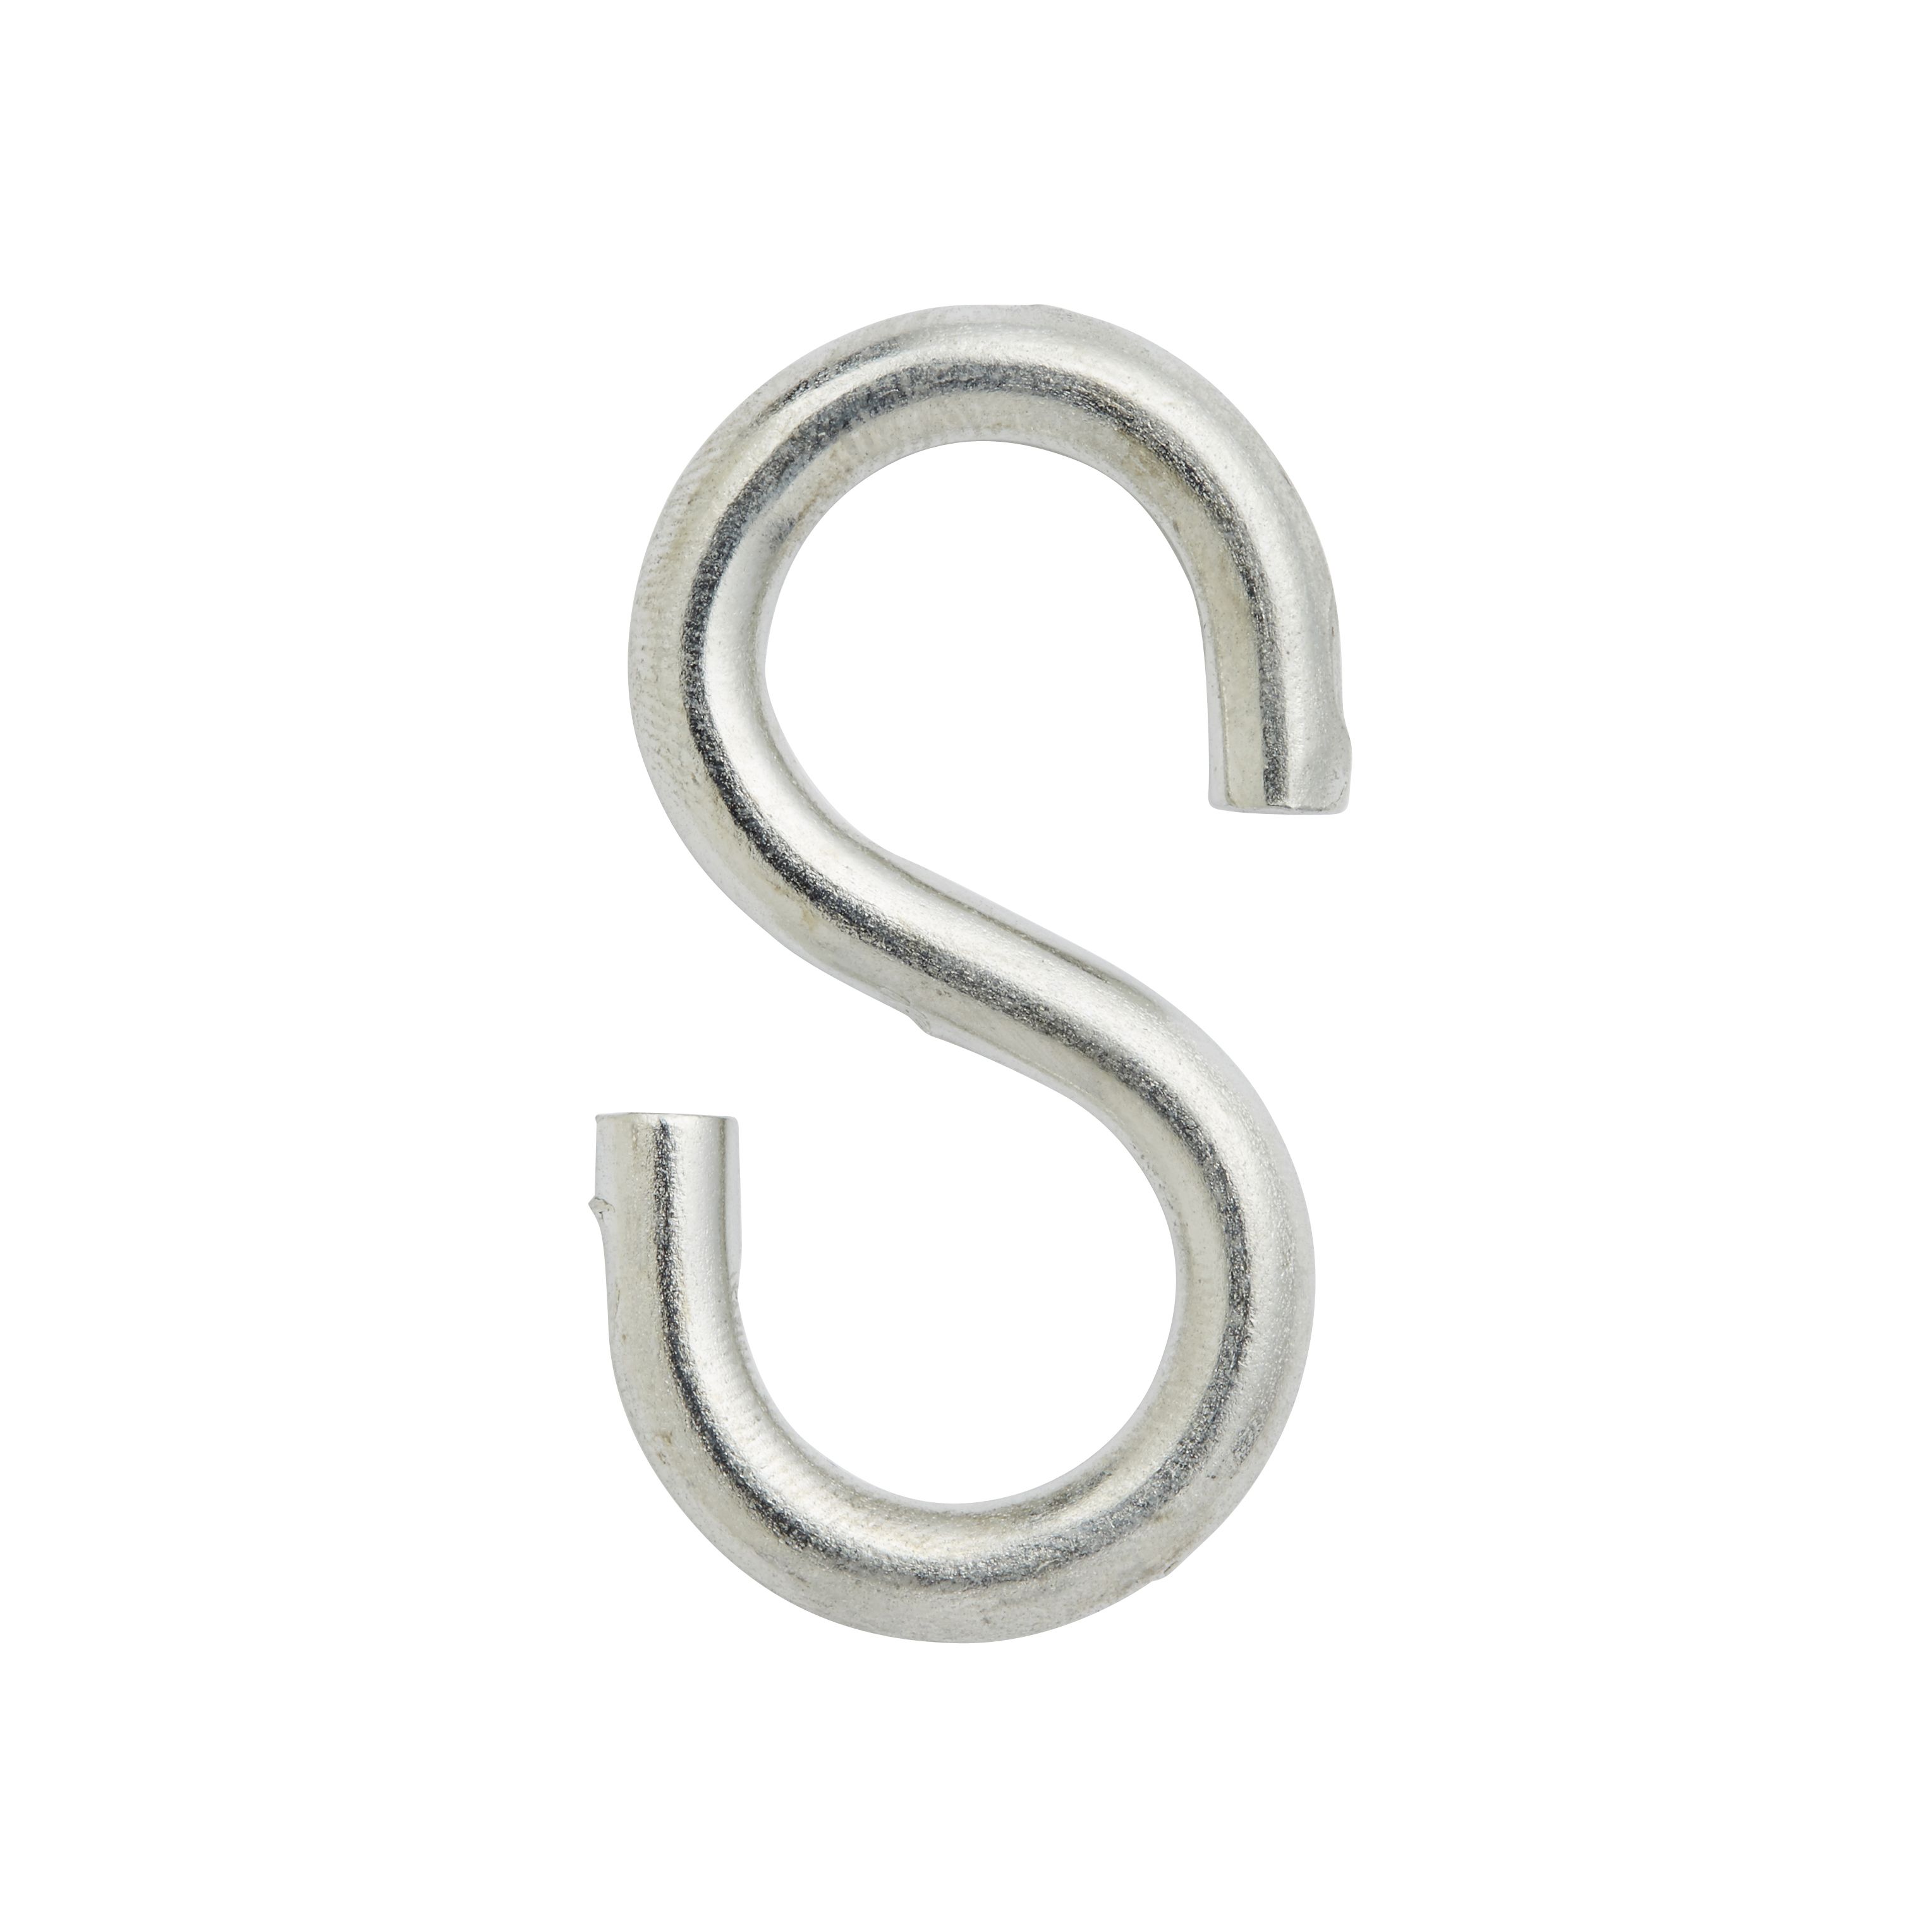 Diall Zinc-plated Steel S-hook (L)30mm, Pack of 6